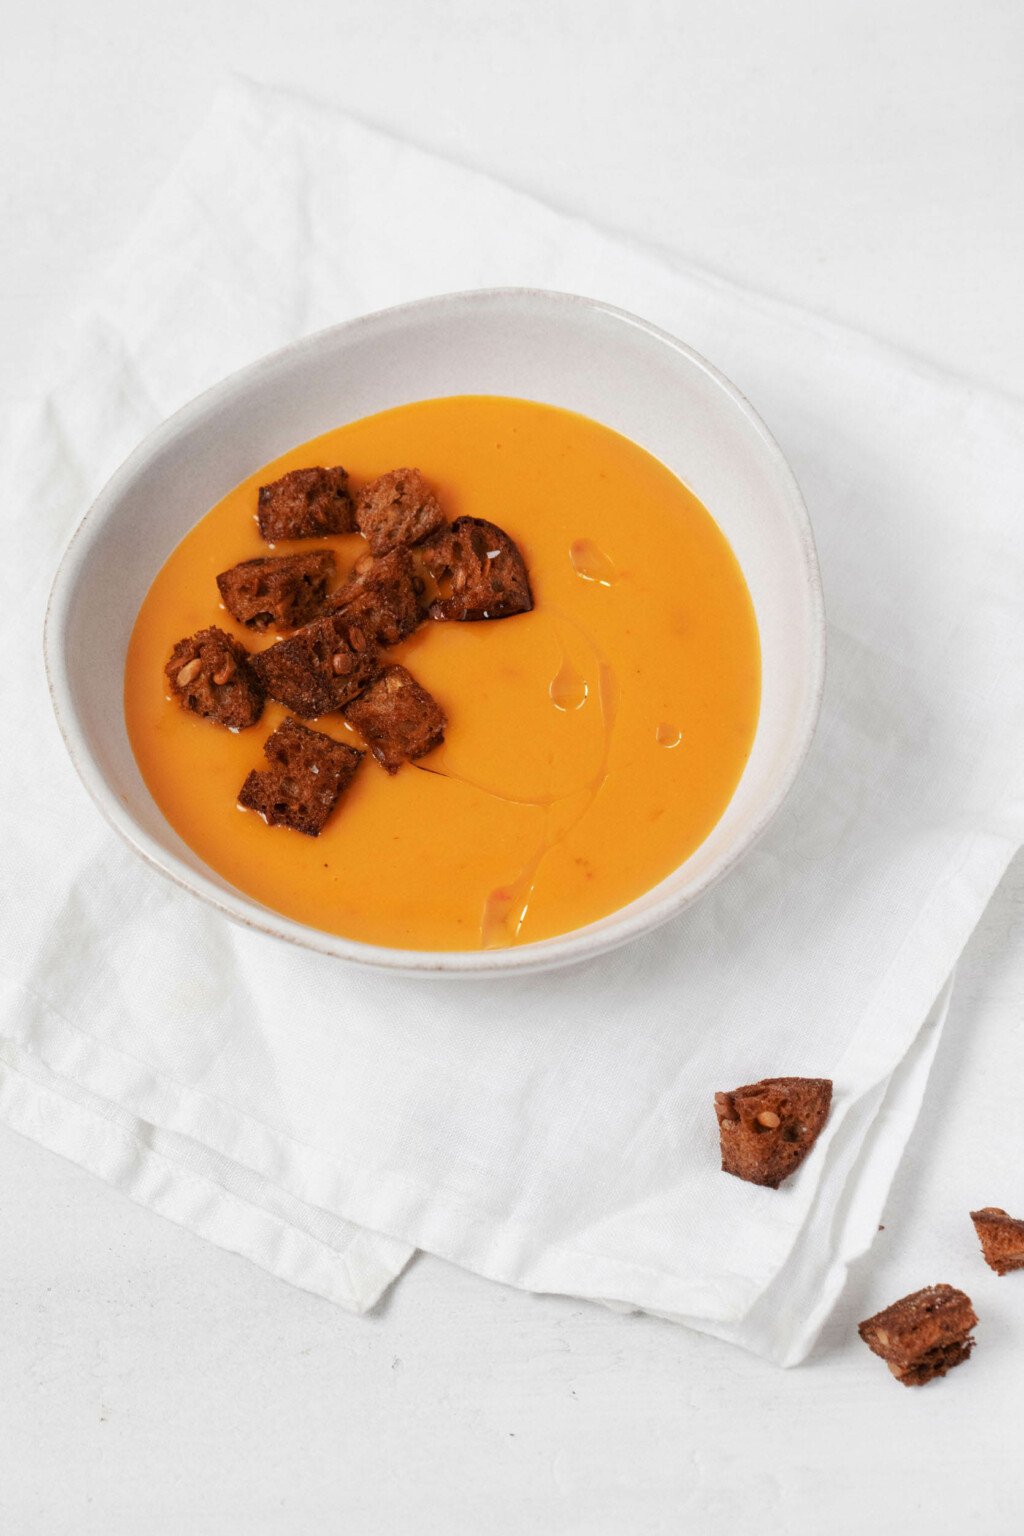 A bowl of orange hued soup has been topped with dark brown, crispy croutons.